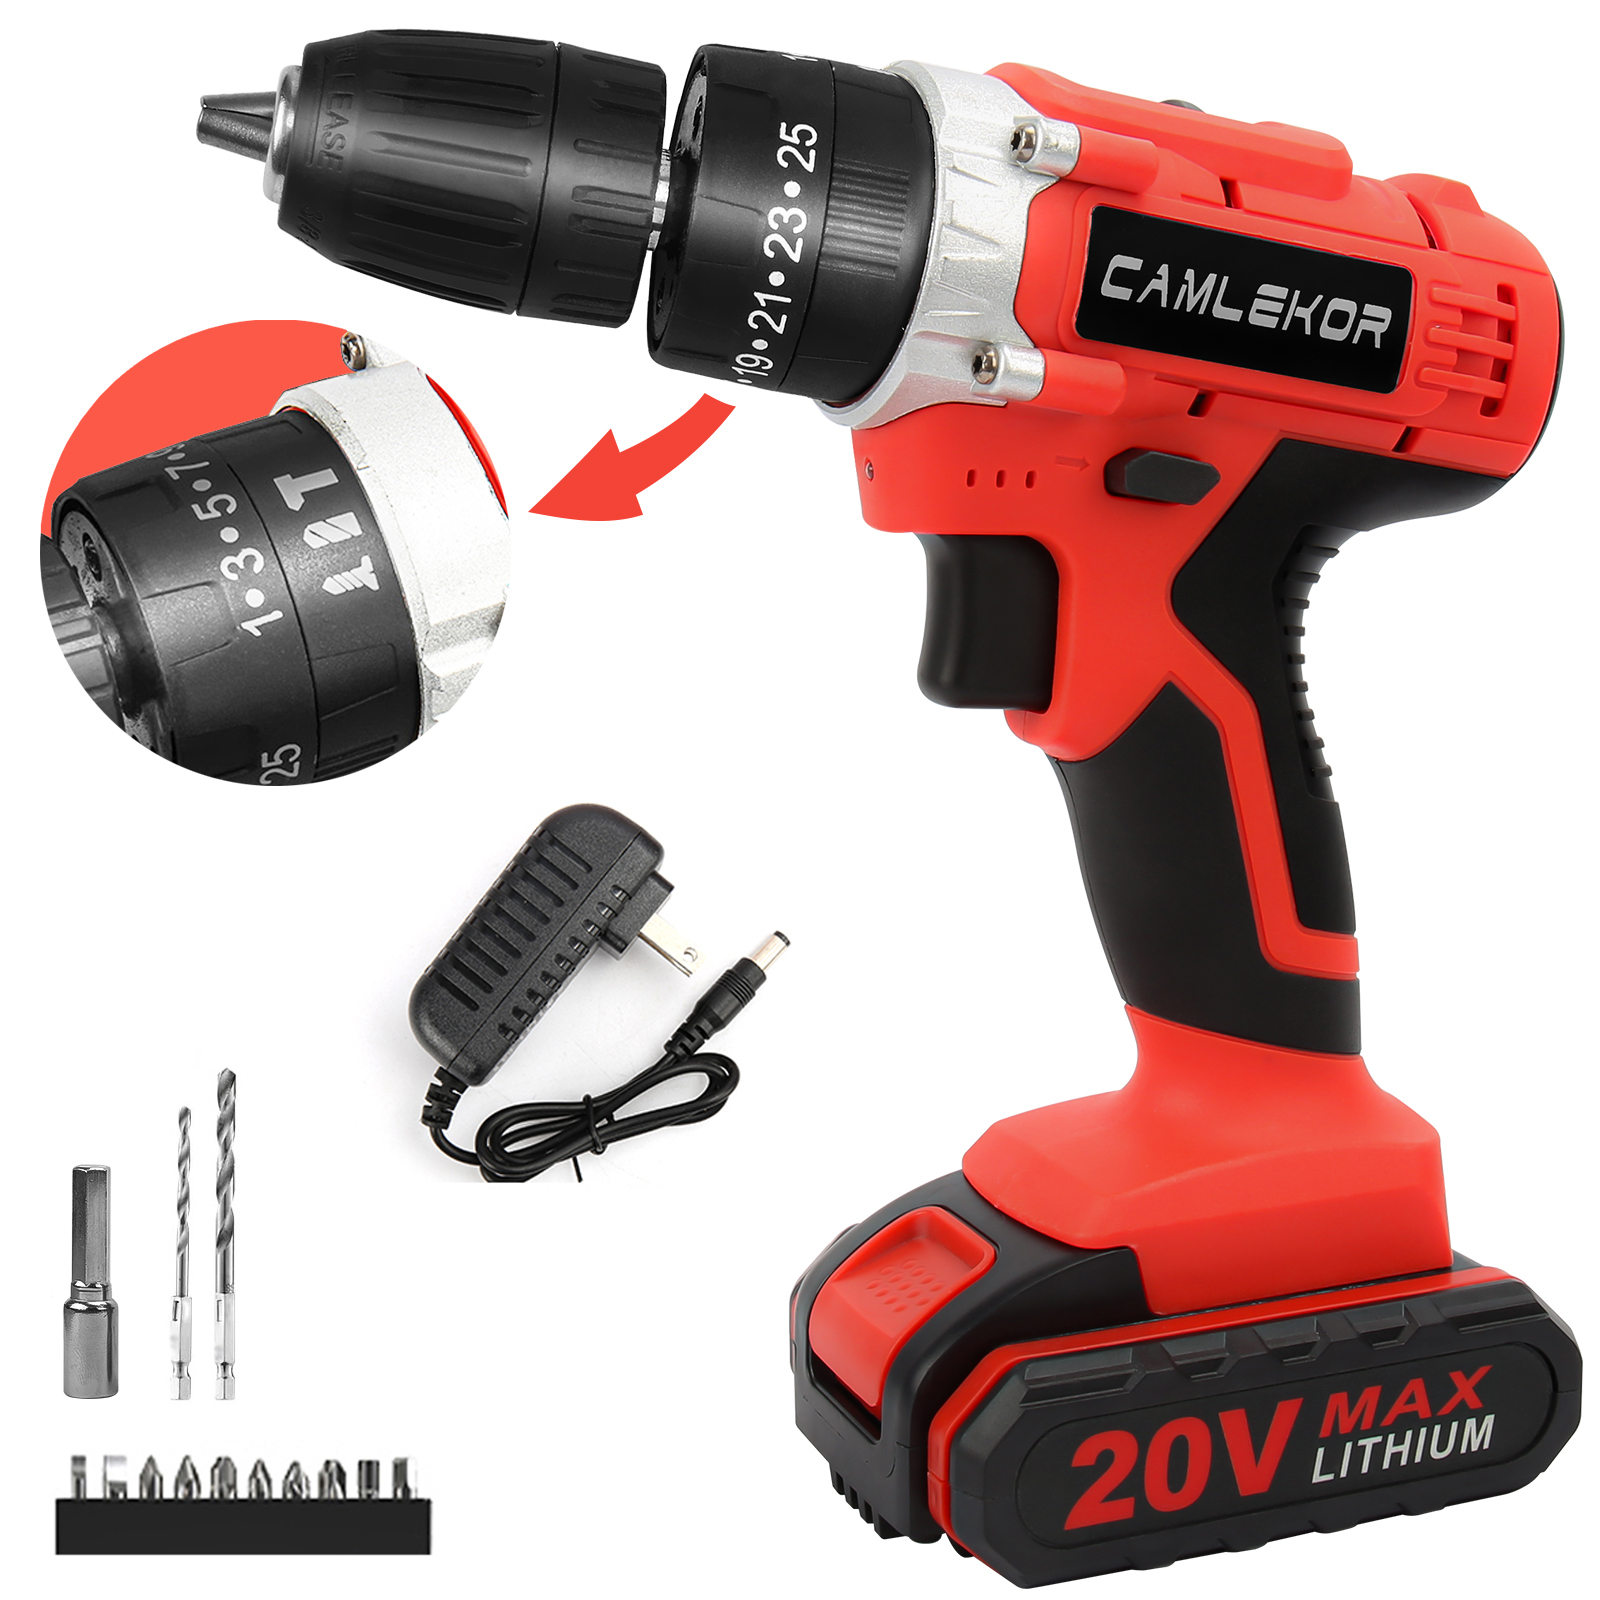 Camlekor Cordless Drill 20V, Electric Power Drill Set 3/8'' Impact Drill, 2 Variable Speeds & 25+3 Position Setting with LED Work Light - image 1 of 8